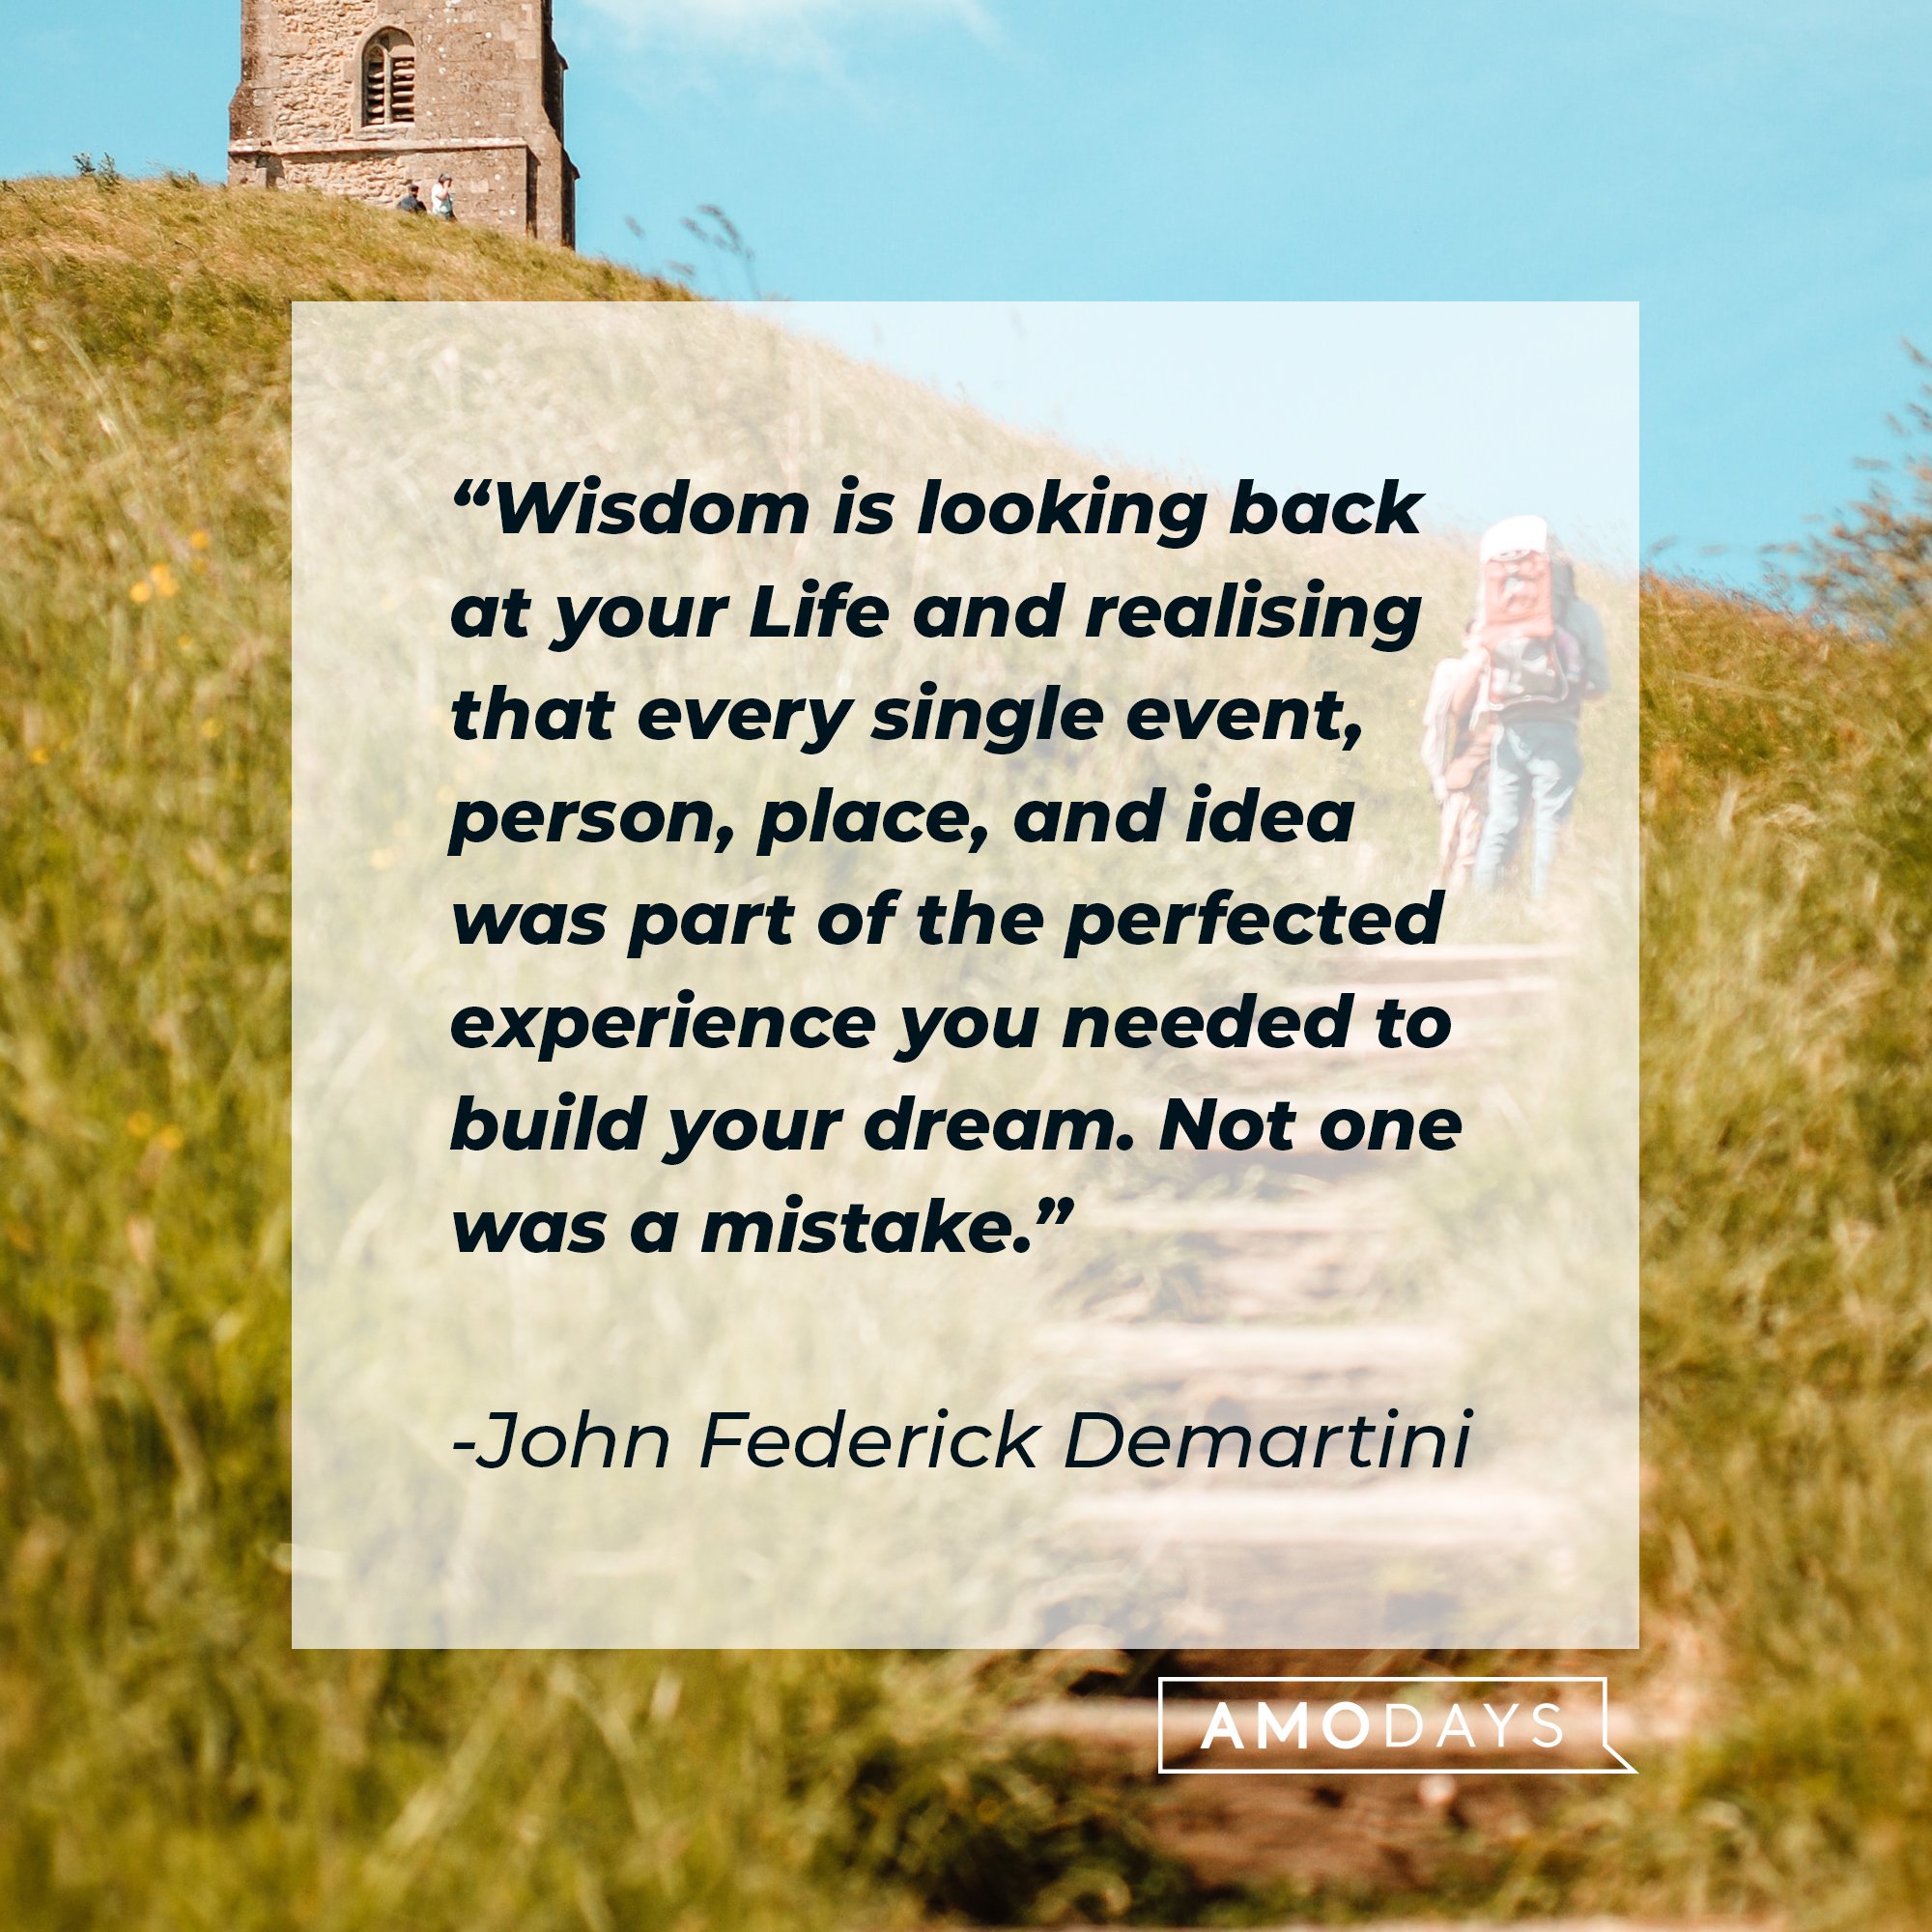 John Federick Demartini’s quote: "Wisdom is looking back at your Life and realizing that every single event, person, place, and idea was part of the perfected experience you needed to build your dream. Not one was a mistake." | Image: AmoDays 